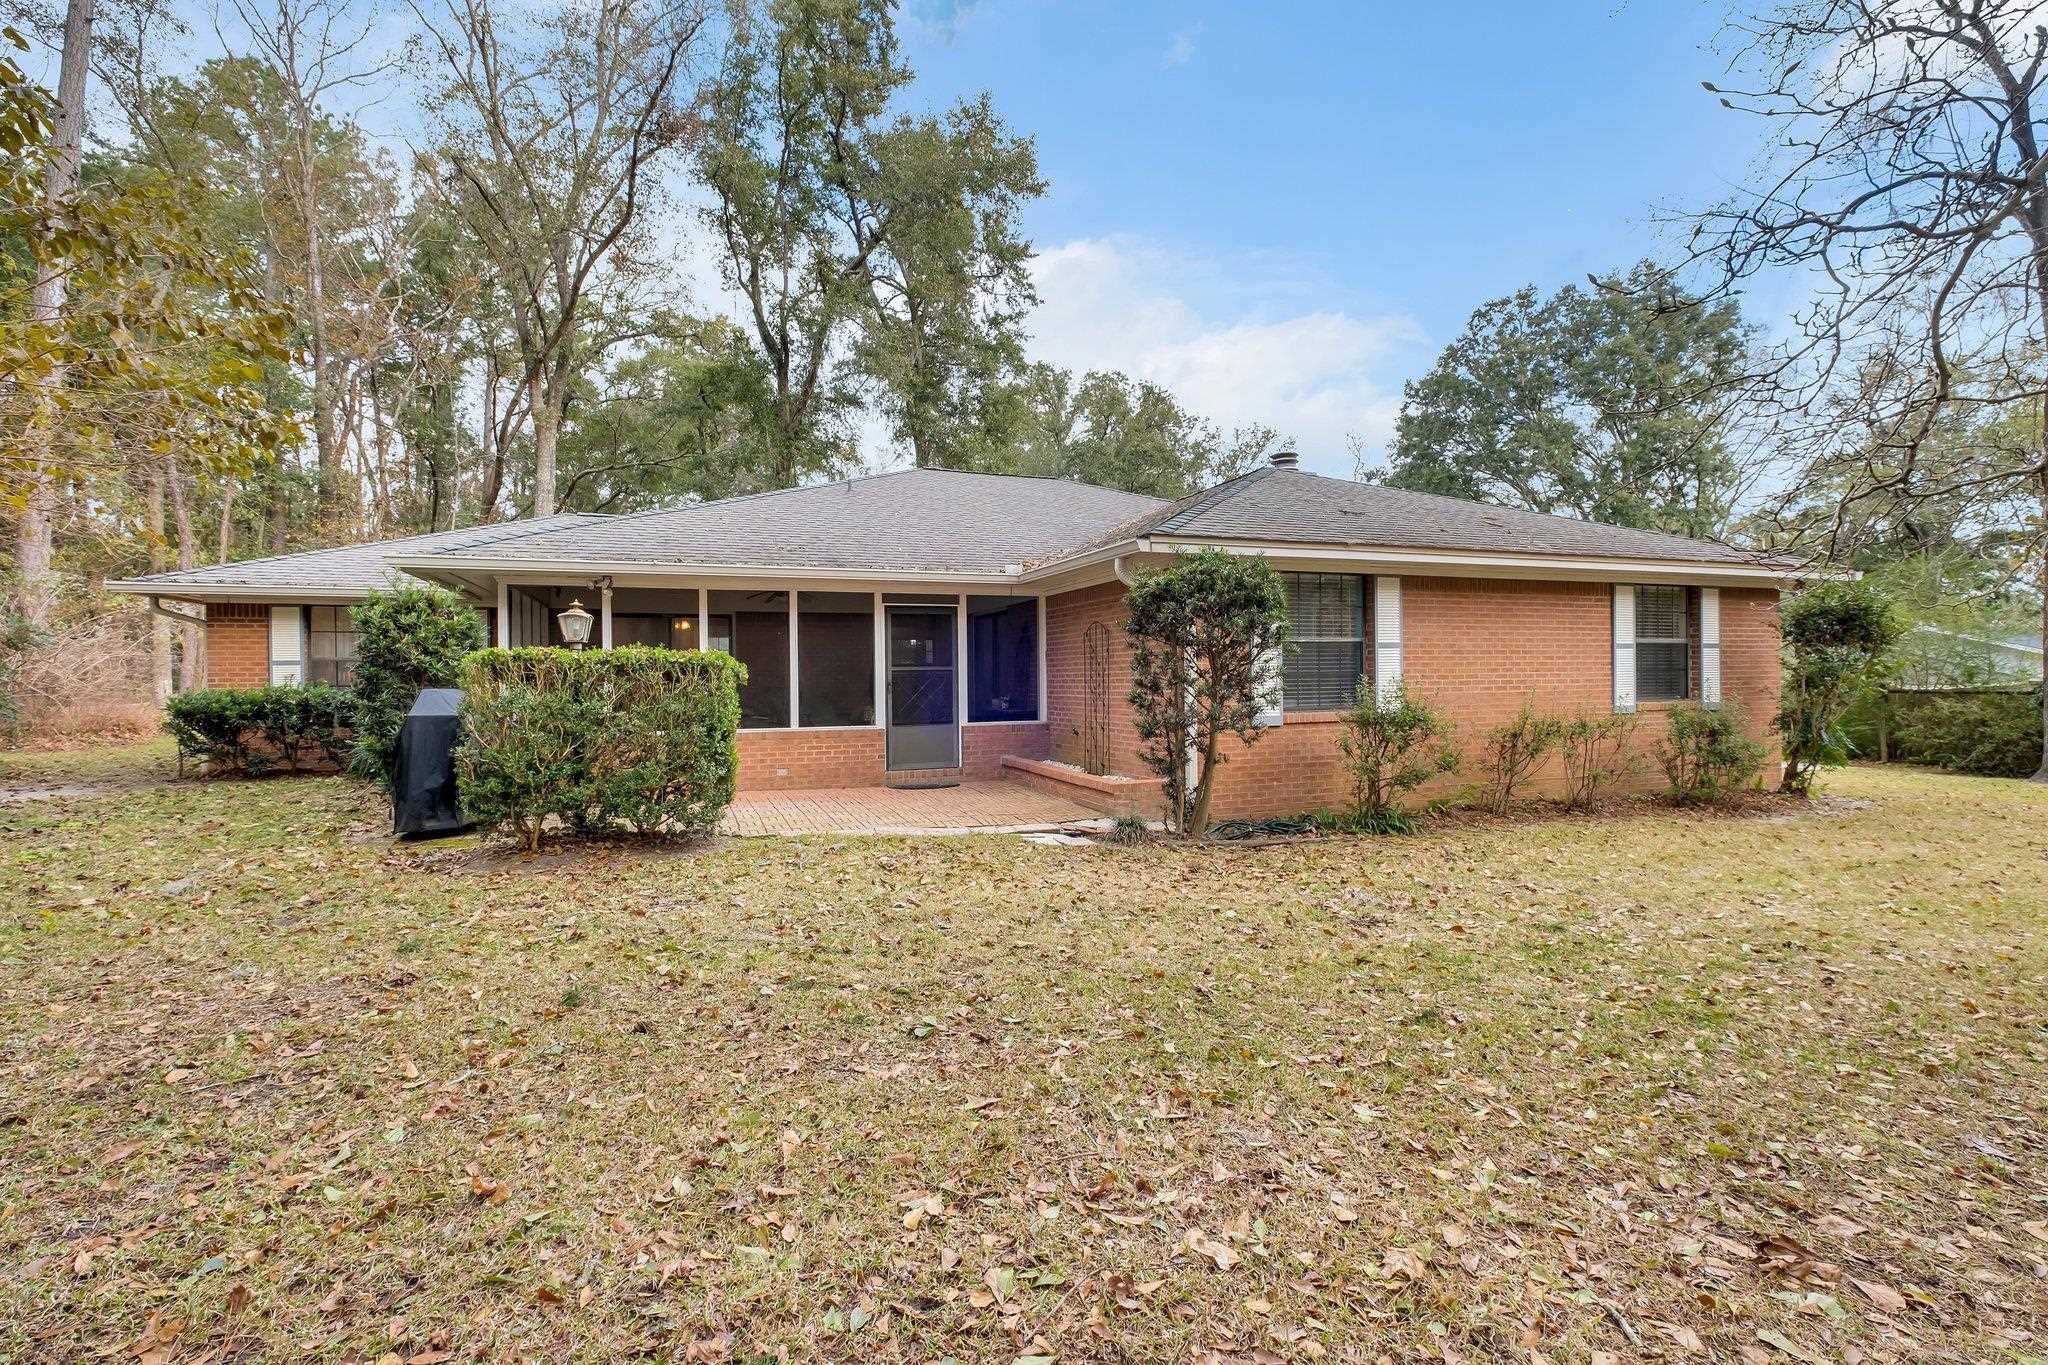 2609 Neuchatel Drive,TALLAHASSEE,Florida 32303,3 Bedrooms Bedrooms,2 BathroomsBathrooms,Detached single family,2609 Neuchatel Drive,369508